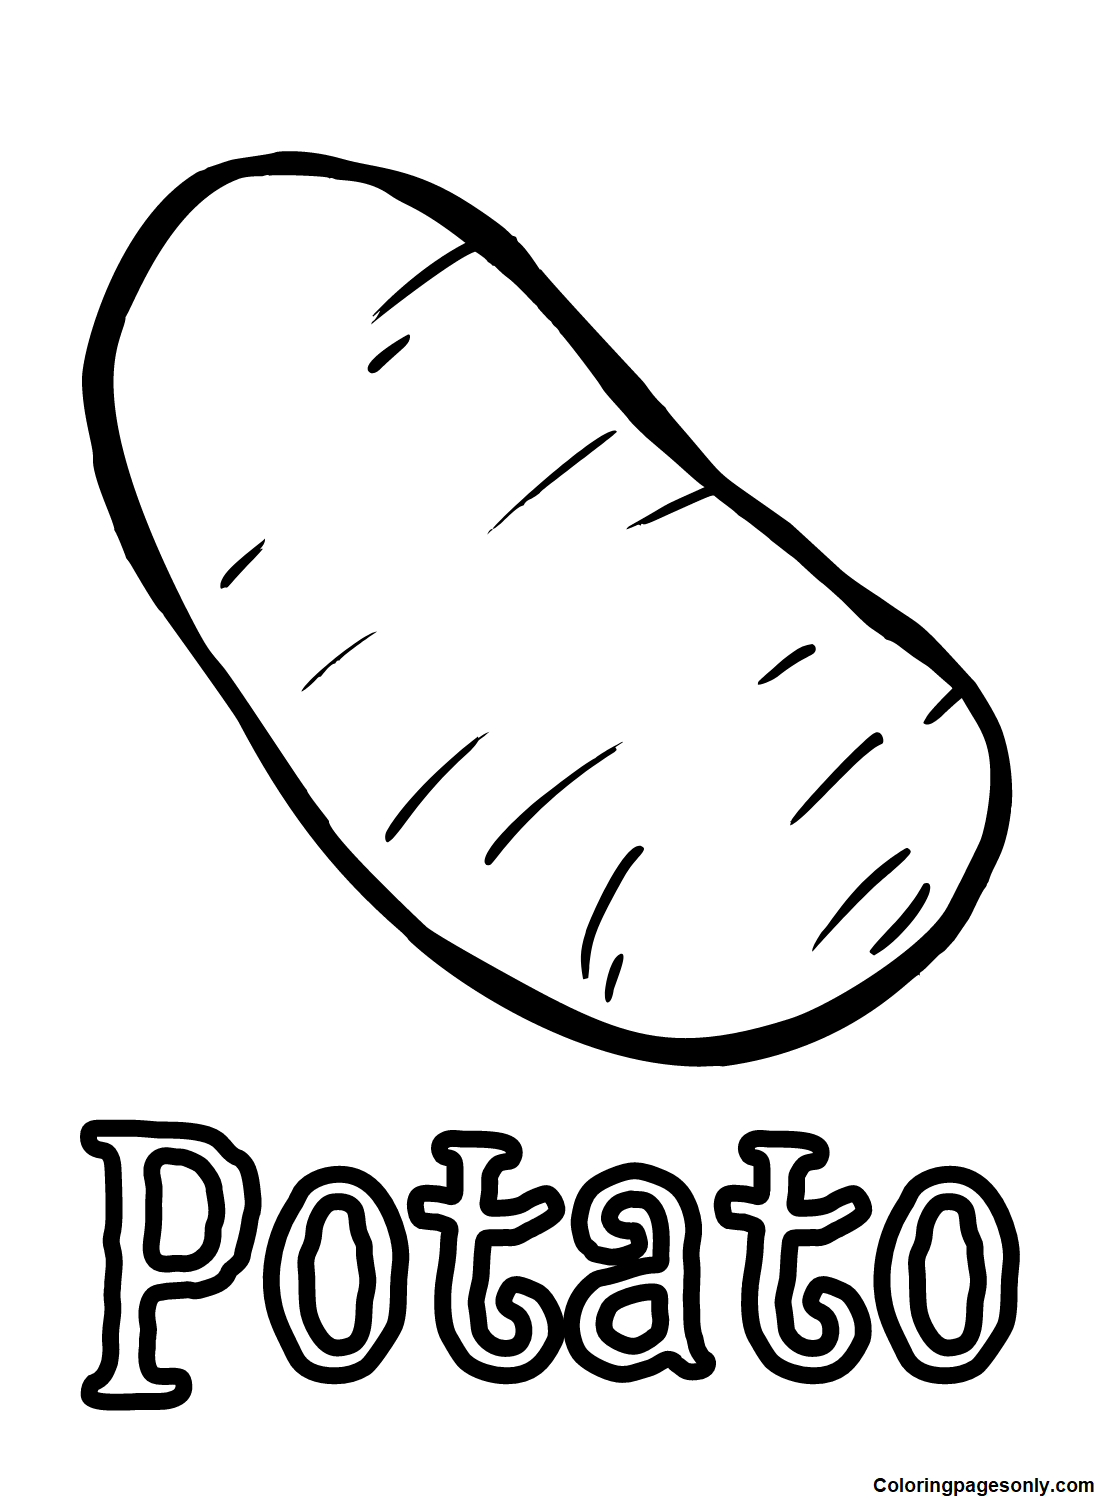 Flat Potato Coloring Pages KDP for Kids Graphic by SNdesign · Creative  Fabrica